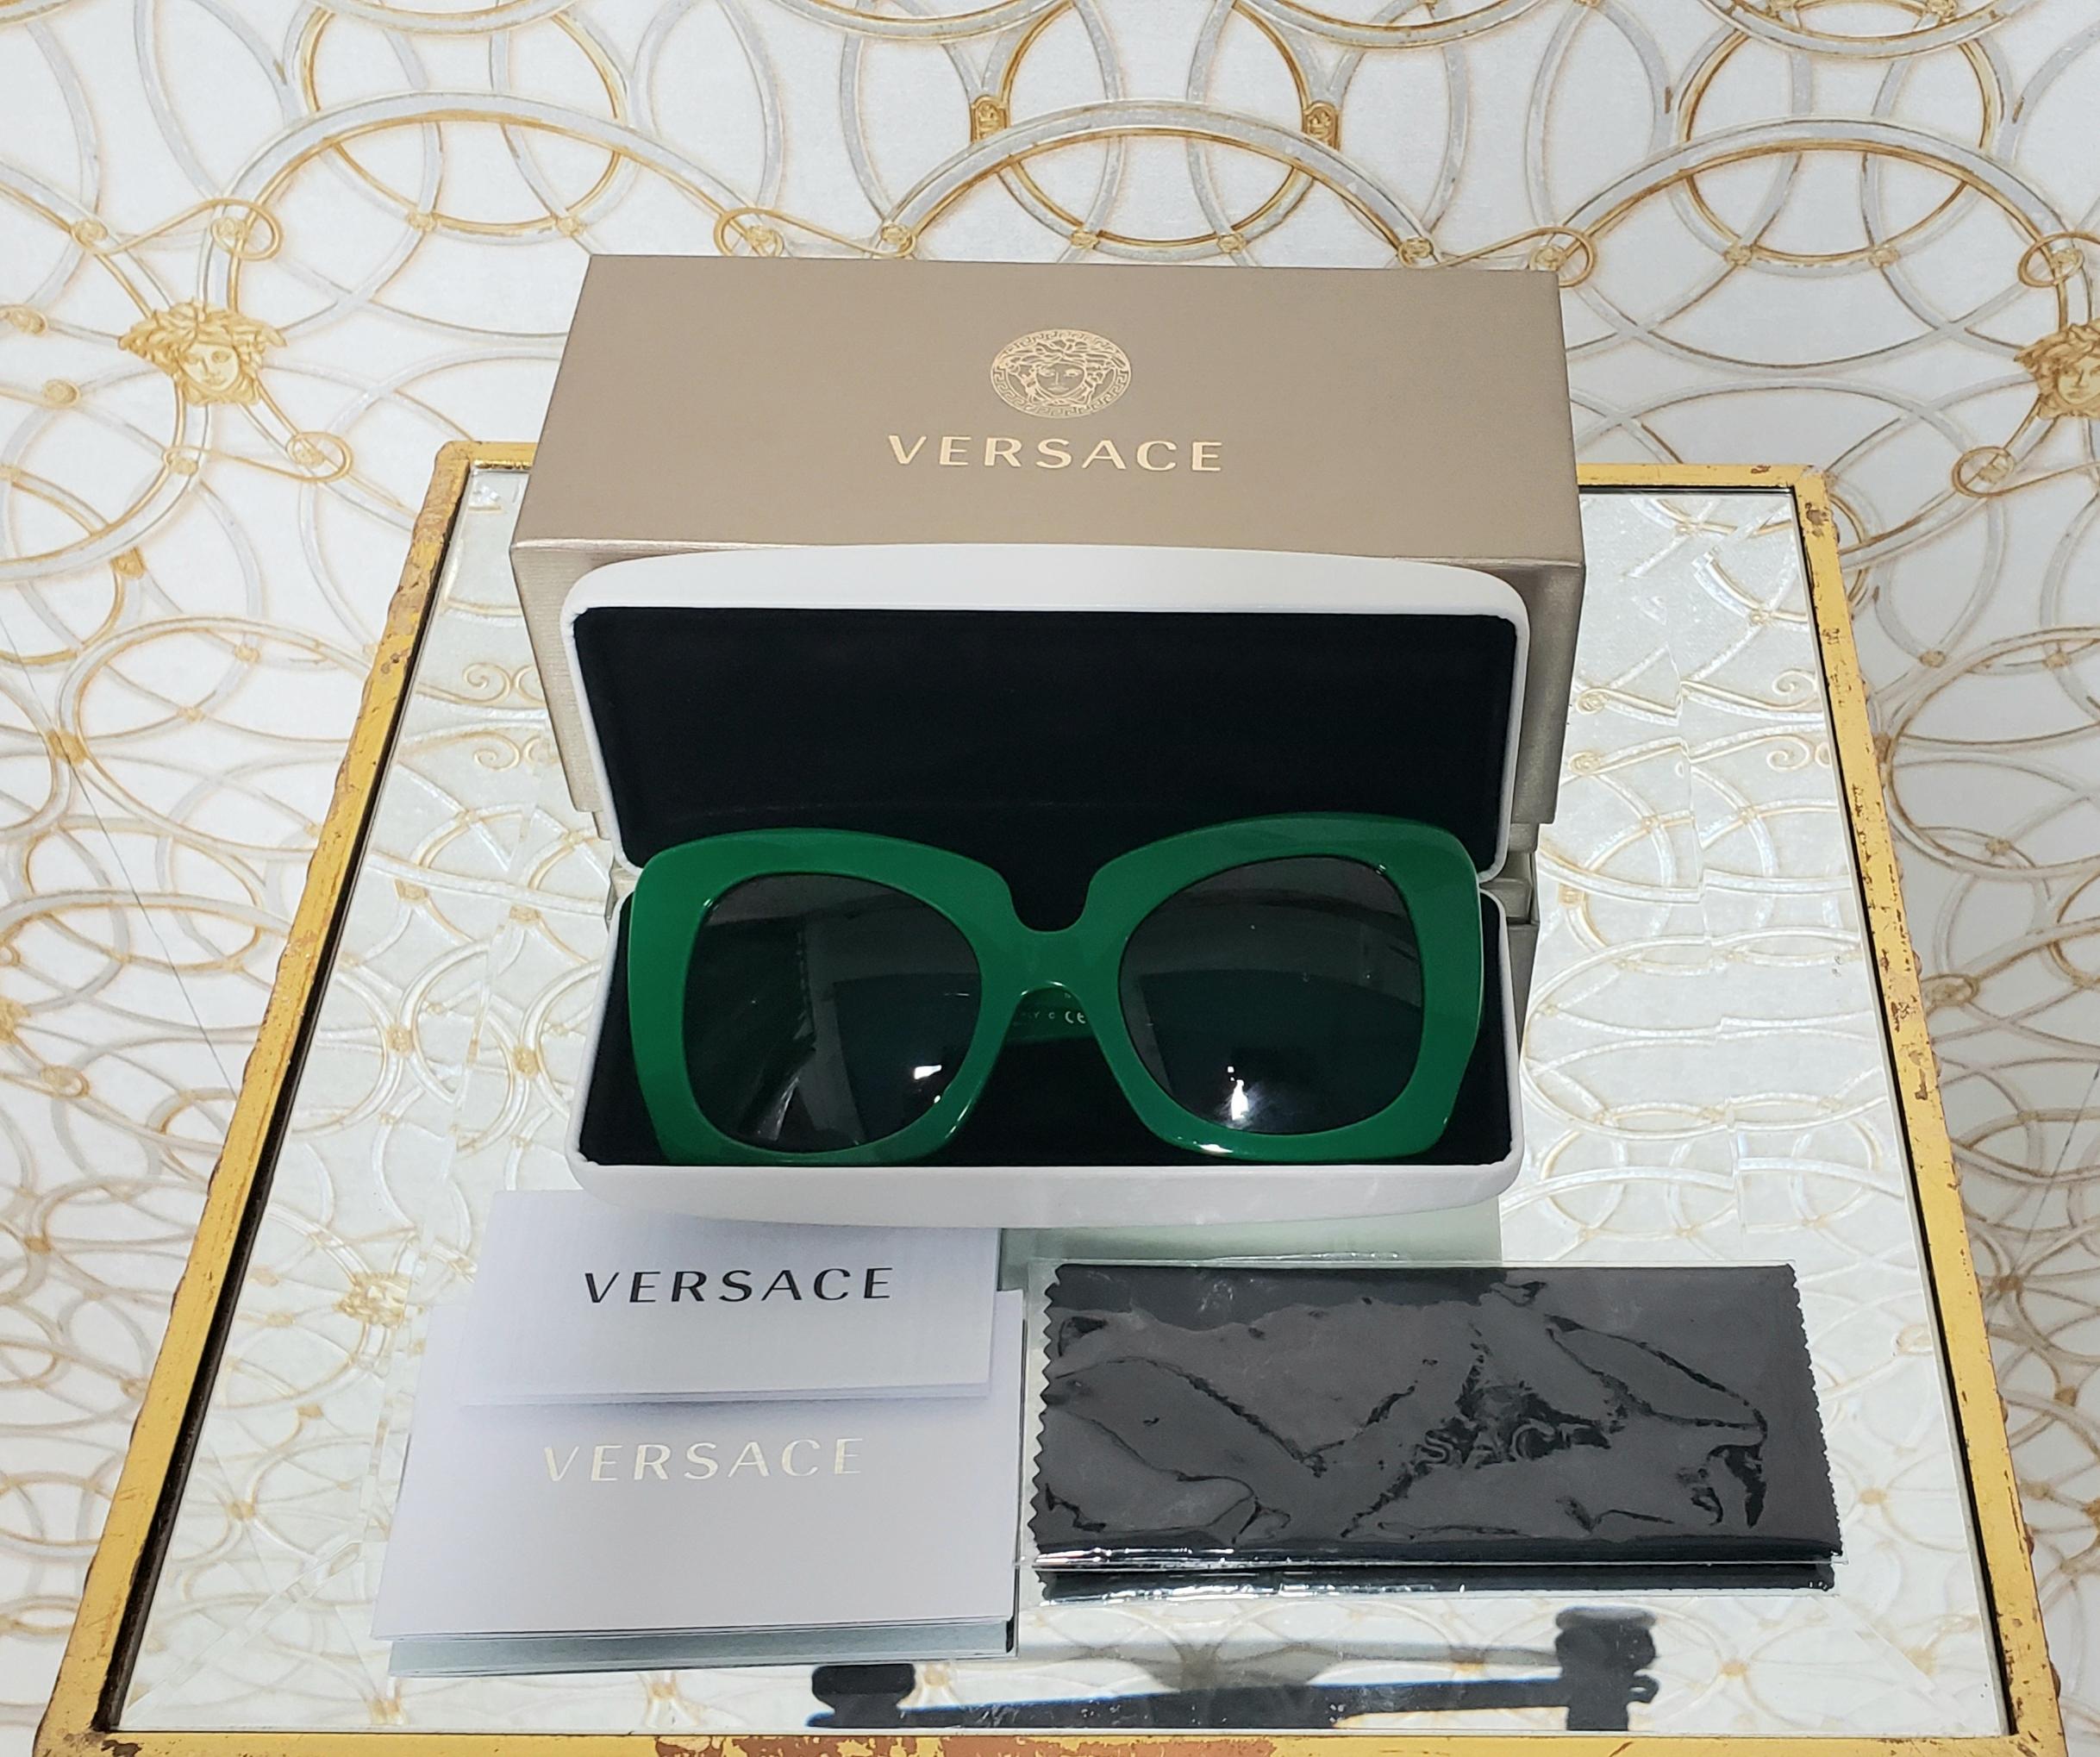  VERSACE

MEDUSA TEMPLE GEOMETRIC SUNGLASSES in GREEN as seen on Rihanna during iHeartRadio Music Awards

Highly collectible !!!

Made in Italy   
New, with tags. Display model. Has a minor scratches. Not noticeable.
Comes with Versace signature Box